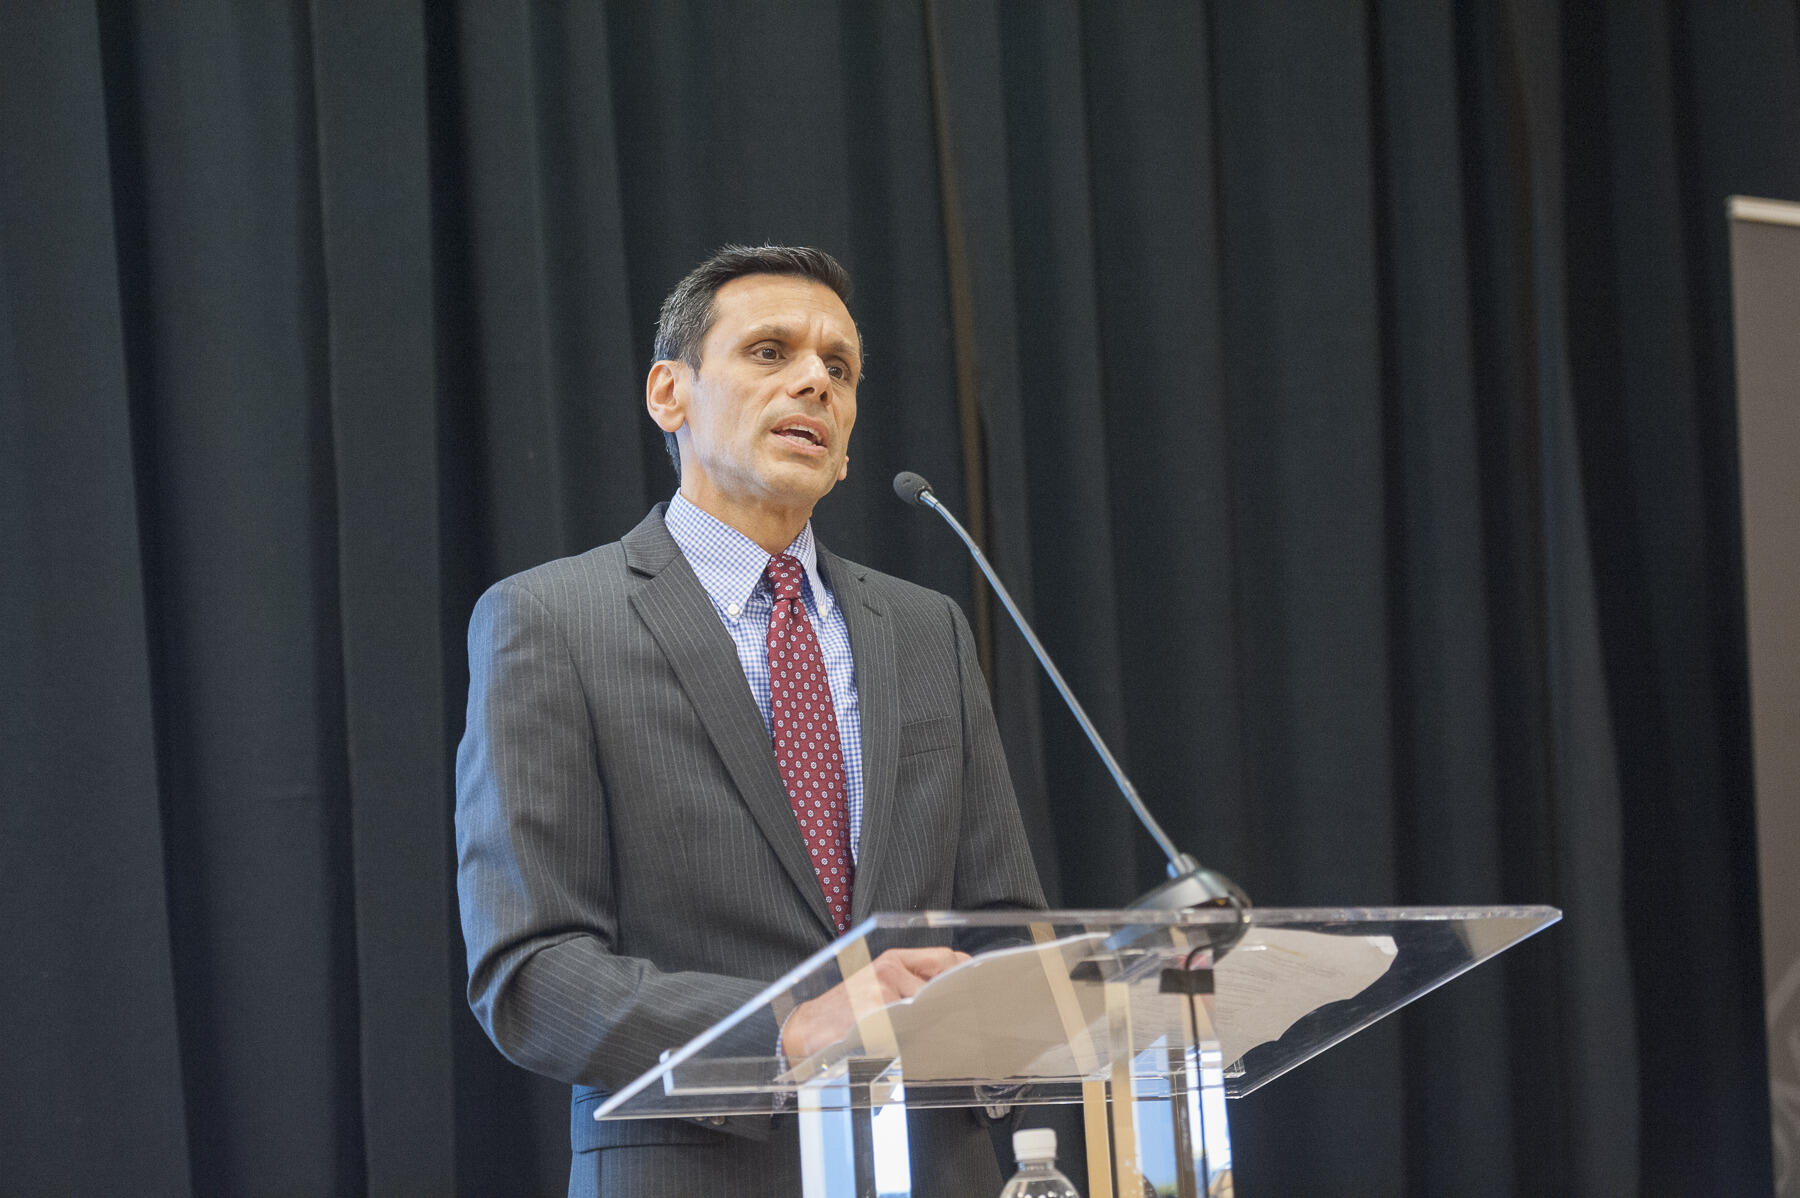 VCU President Michael Rao, Ph.D., convened Tuesday's forum to provide an opportunity for members of the VCU community to engage in critical, deep and informed dialogue on important issues facing society.